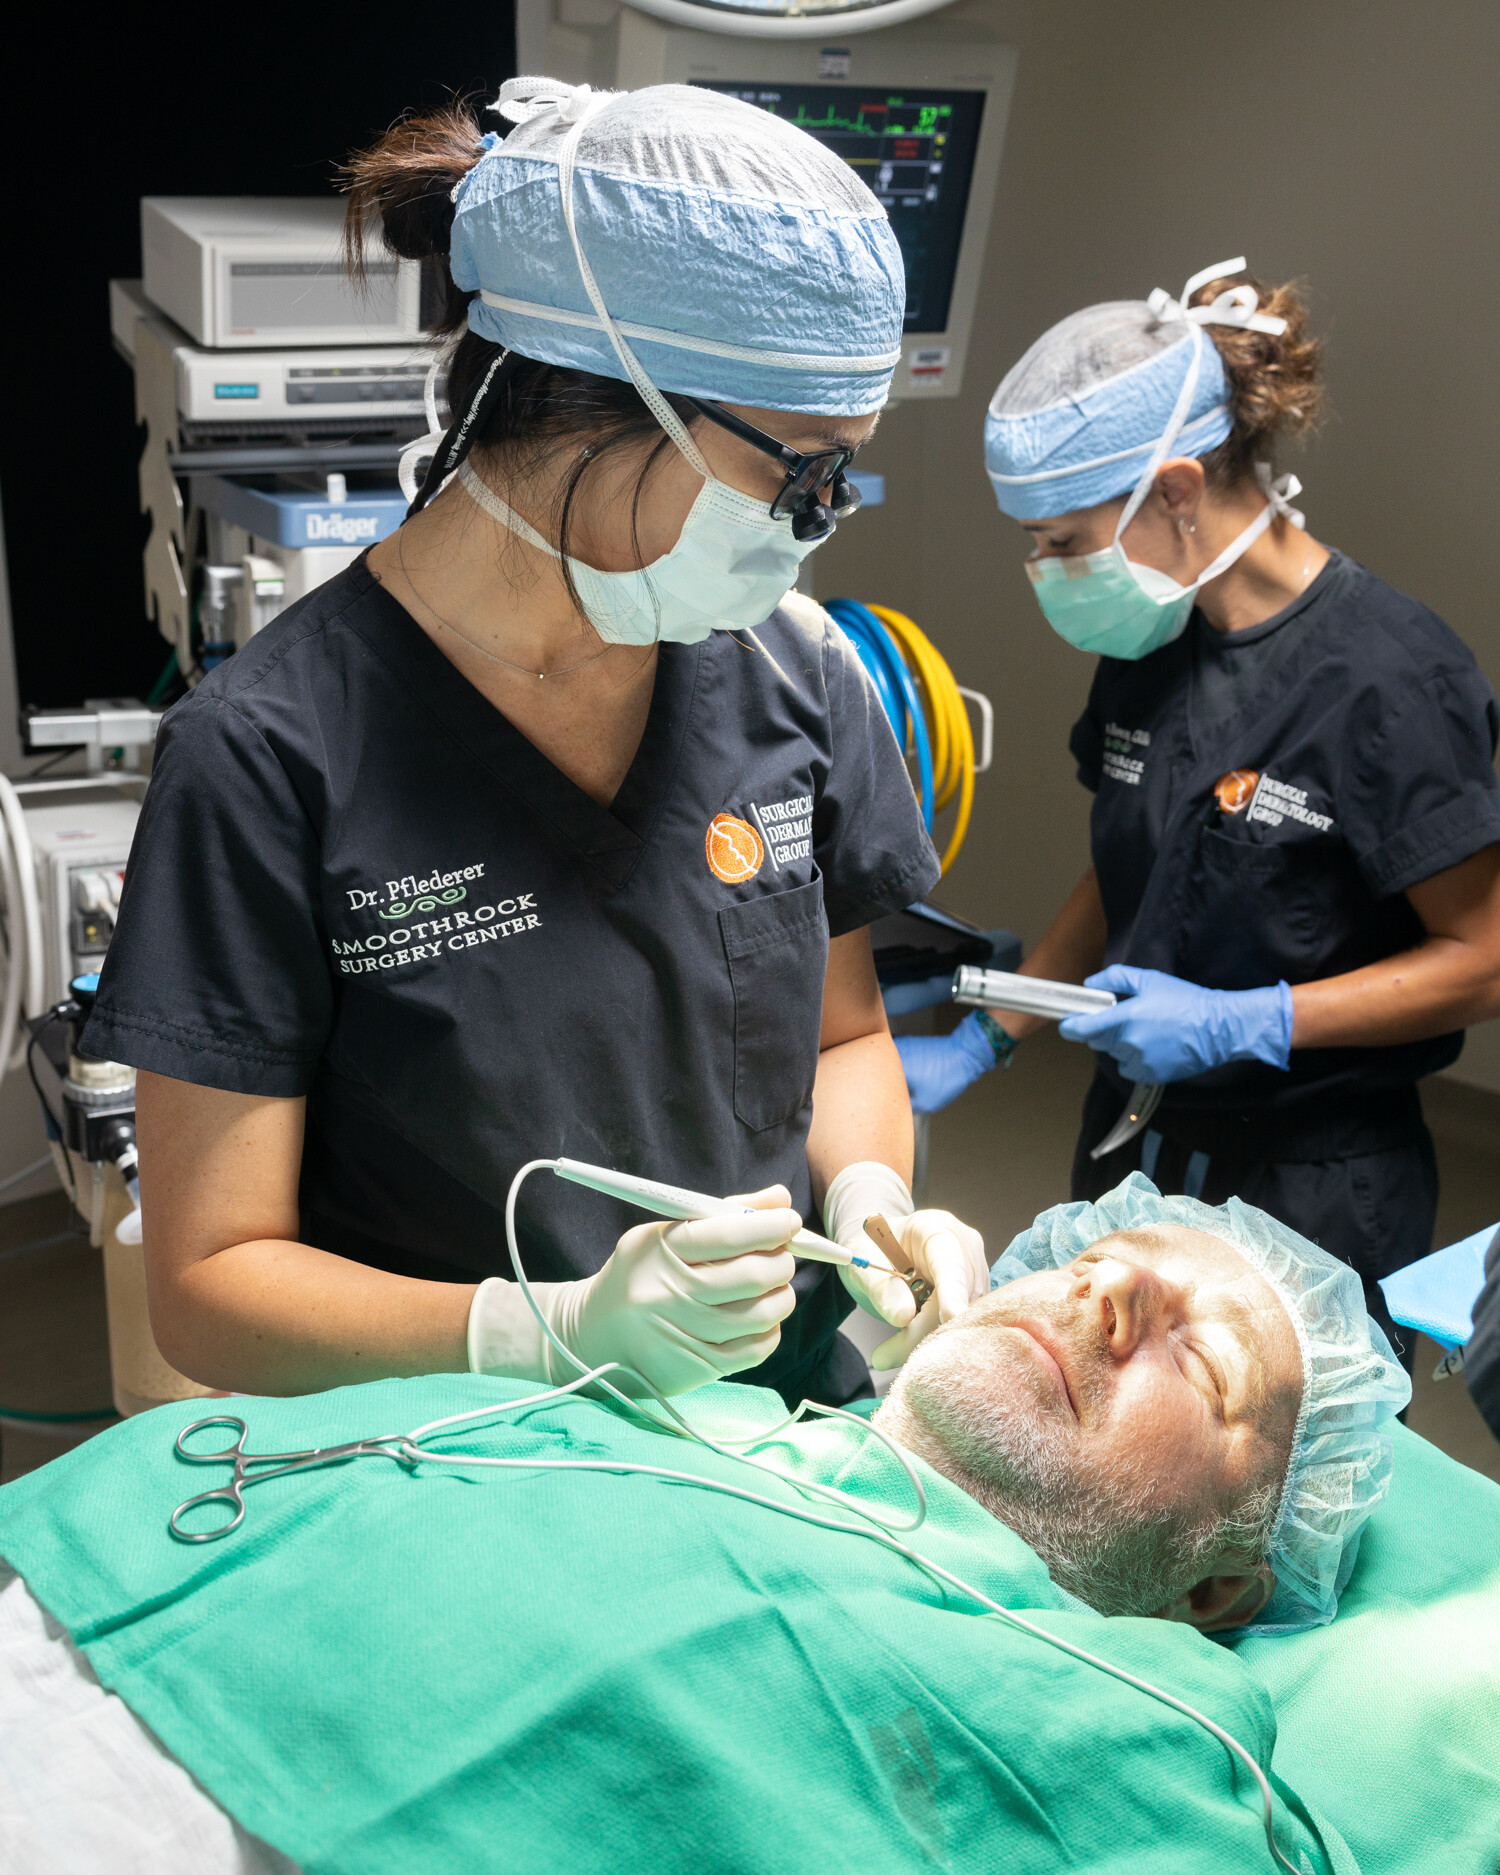 A doctor does a procedure on a patient with a medical provider in the background at Surgical Dermatology Group